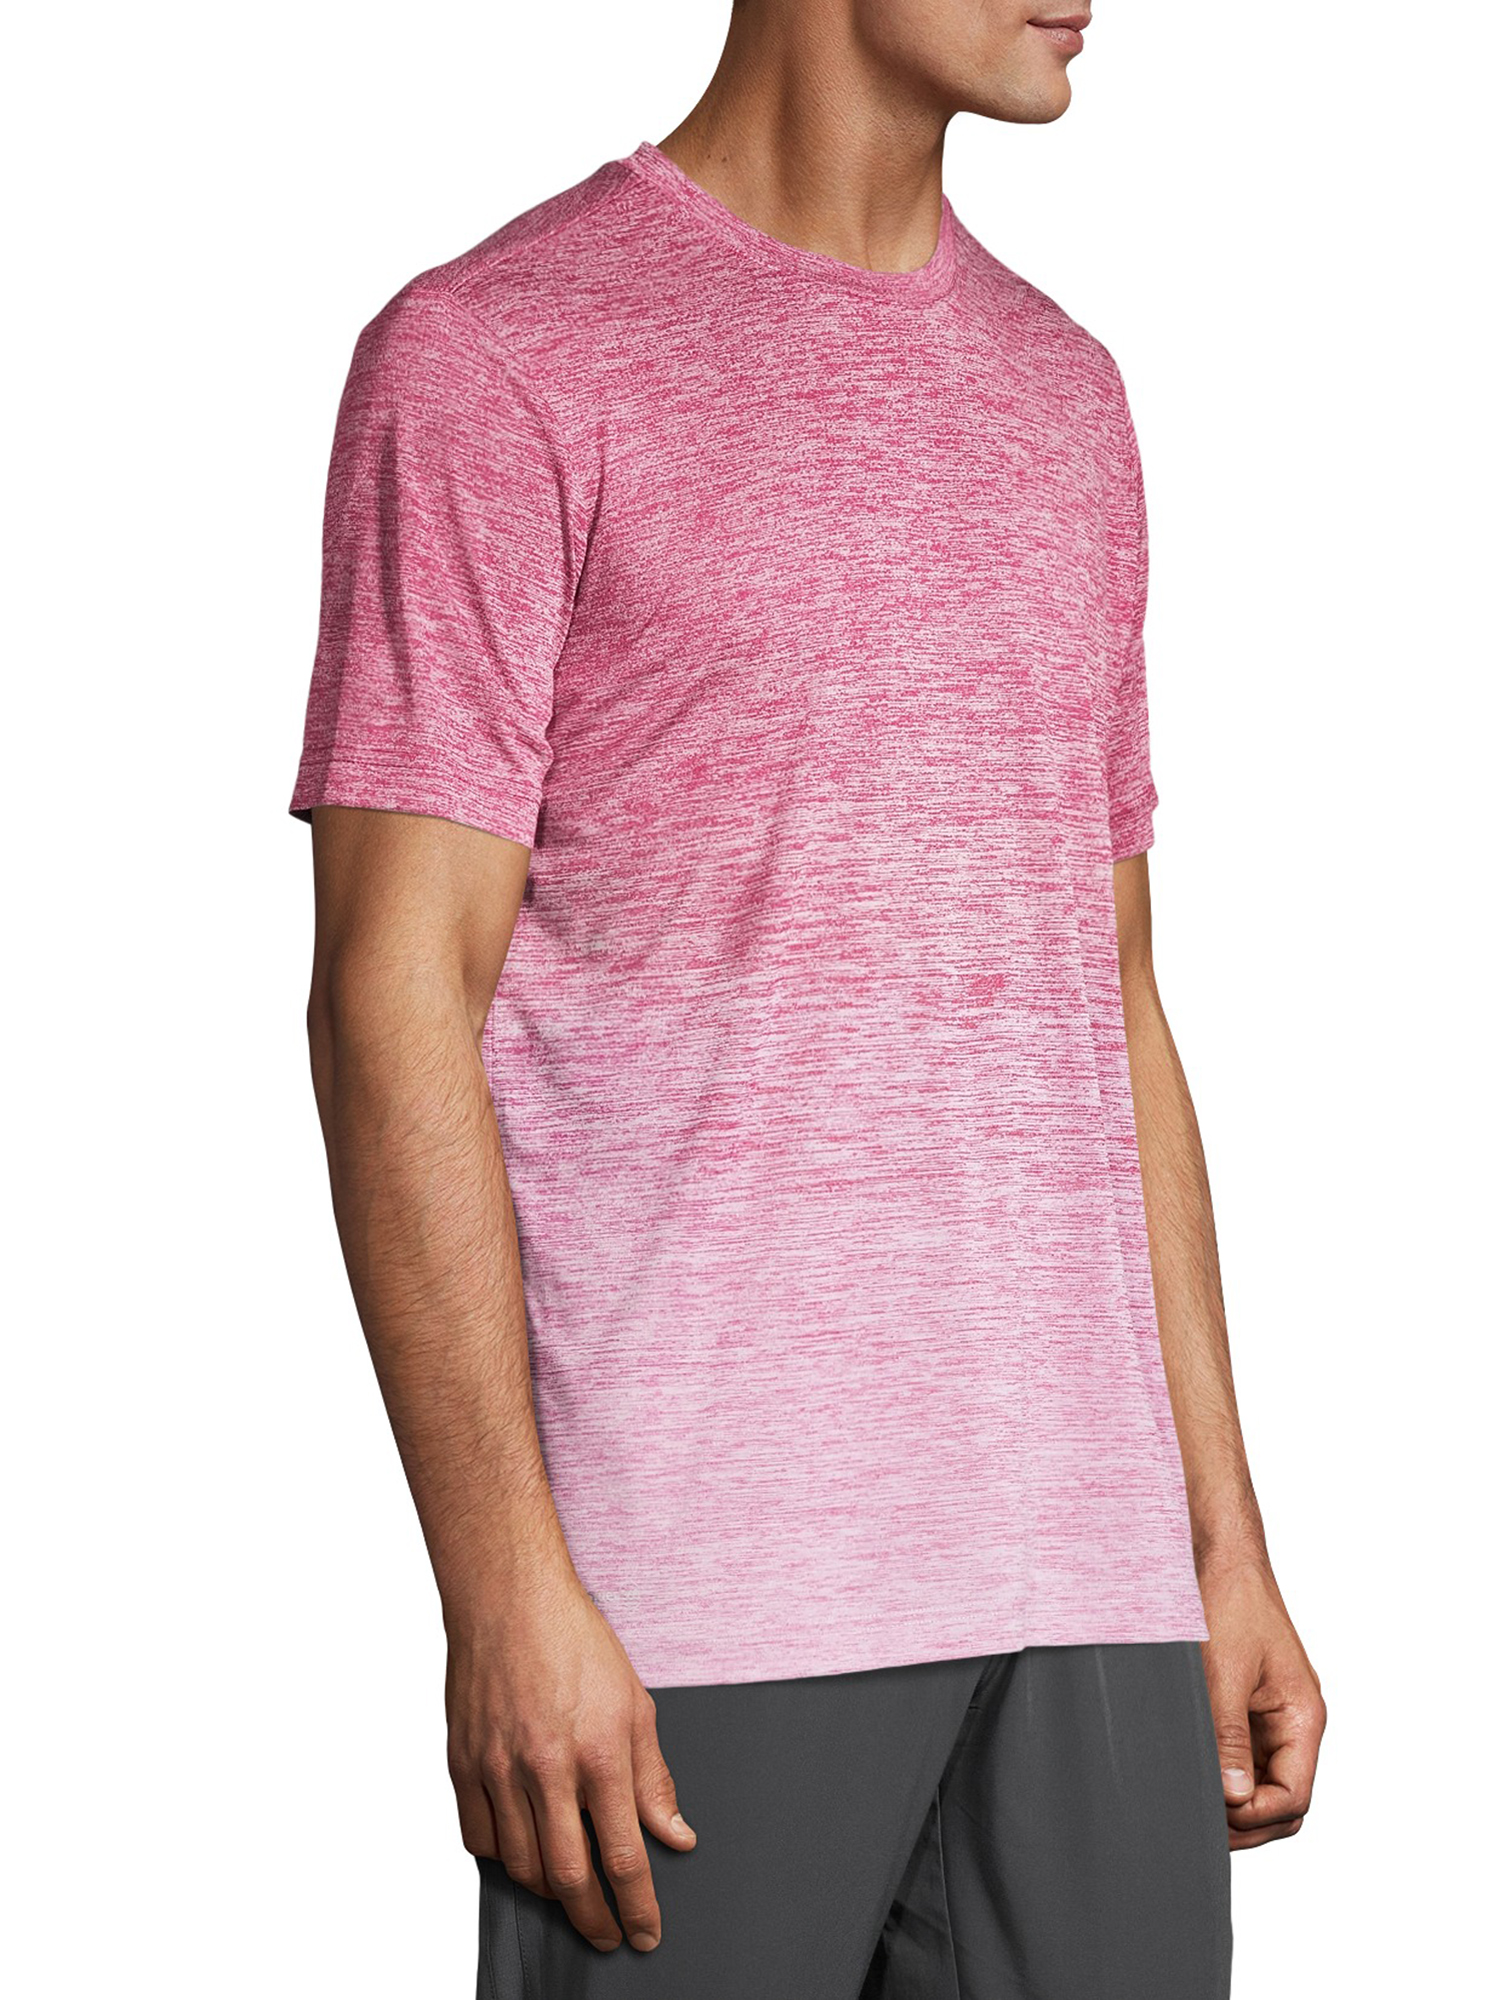 Russell Men's and Big Men's Ombre Performance Tee, up to Size 5XL - image 4 of 6